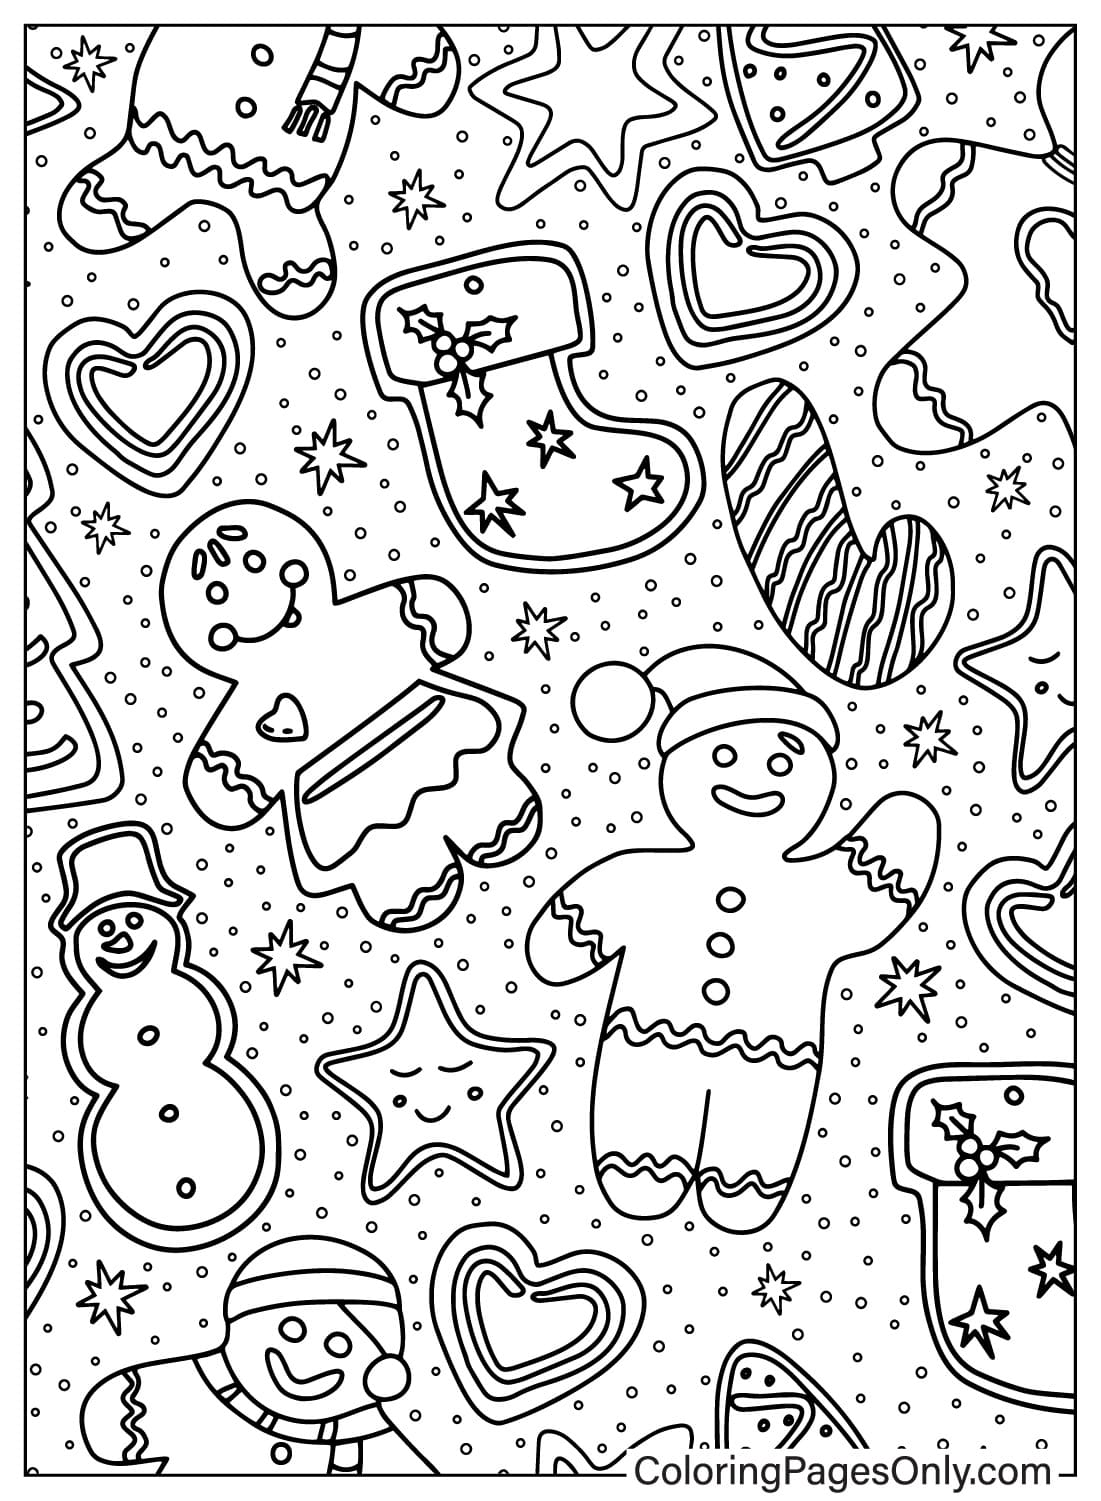 Christmas Pattern Coloring Page to Print from Christmas Pattern